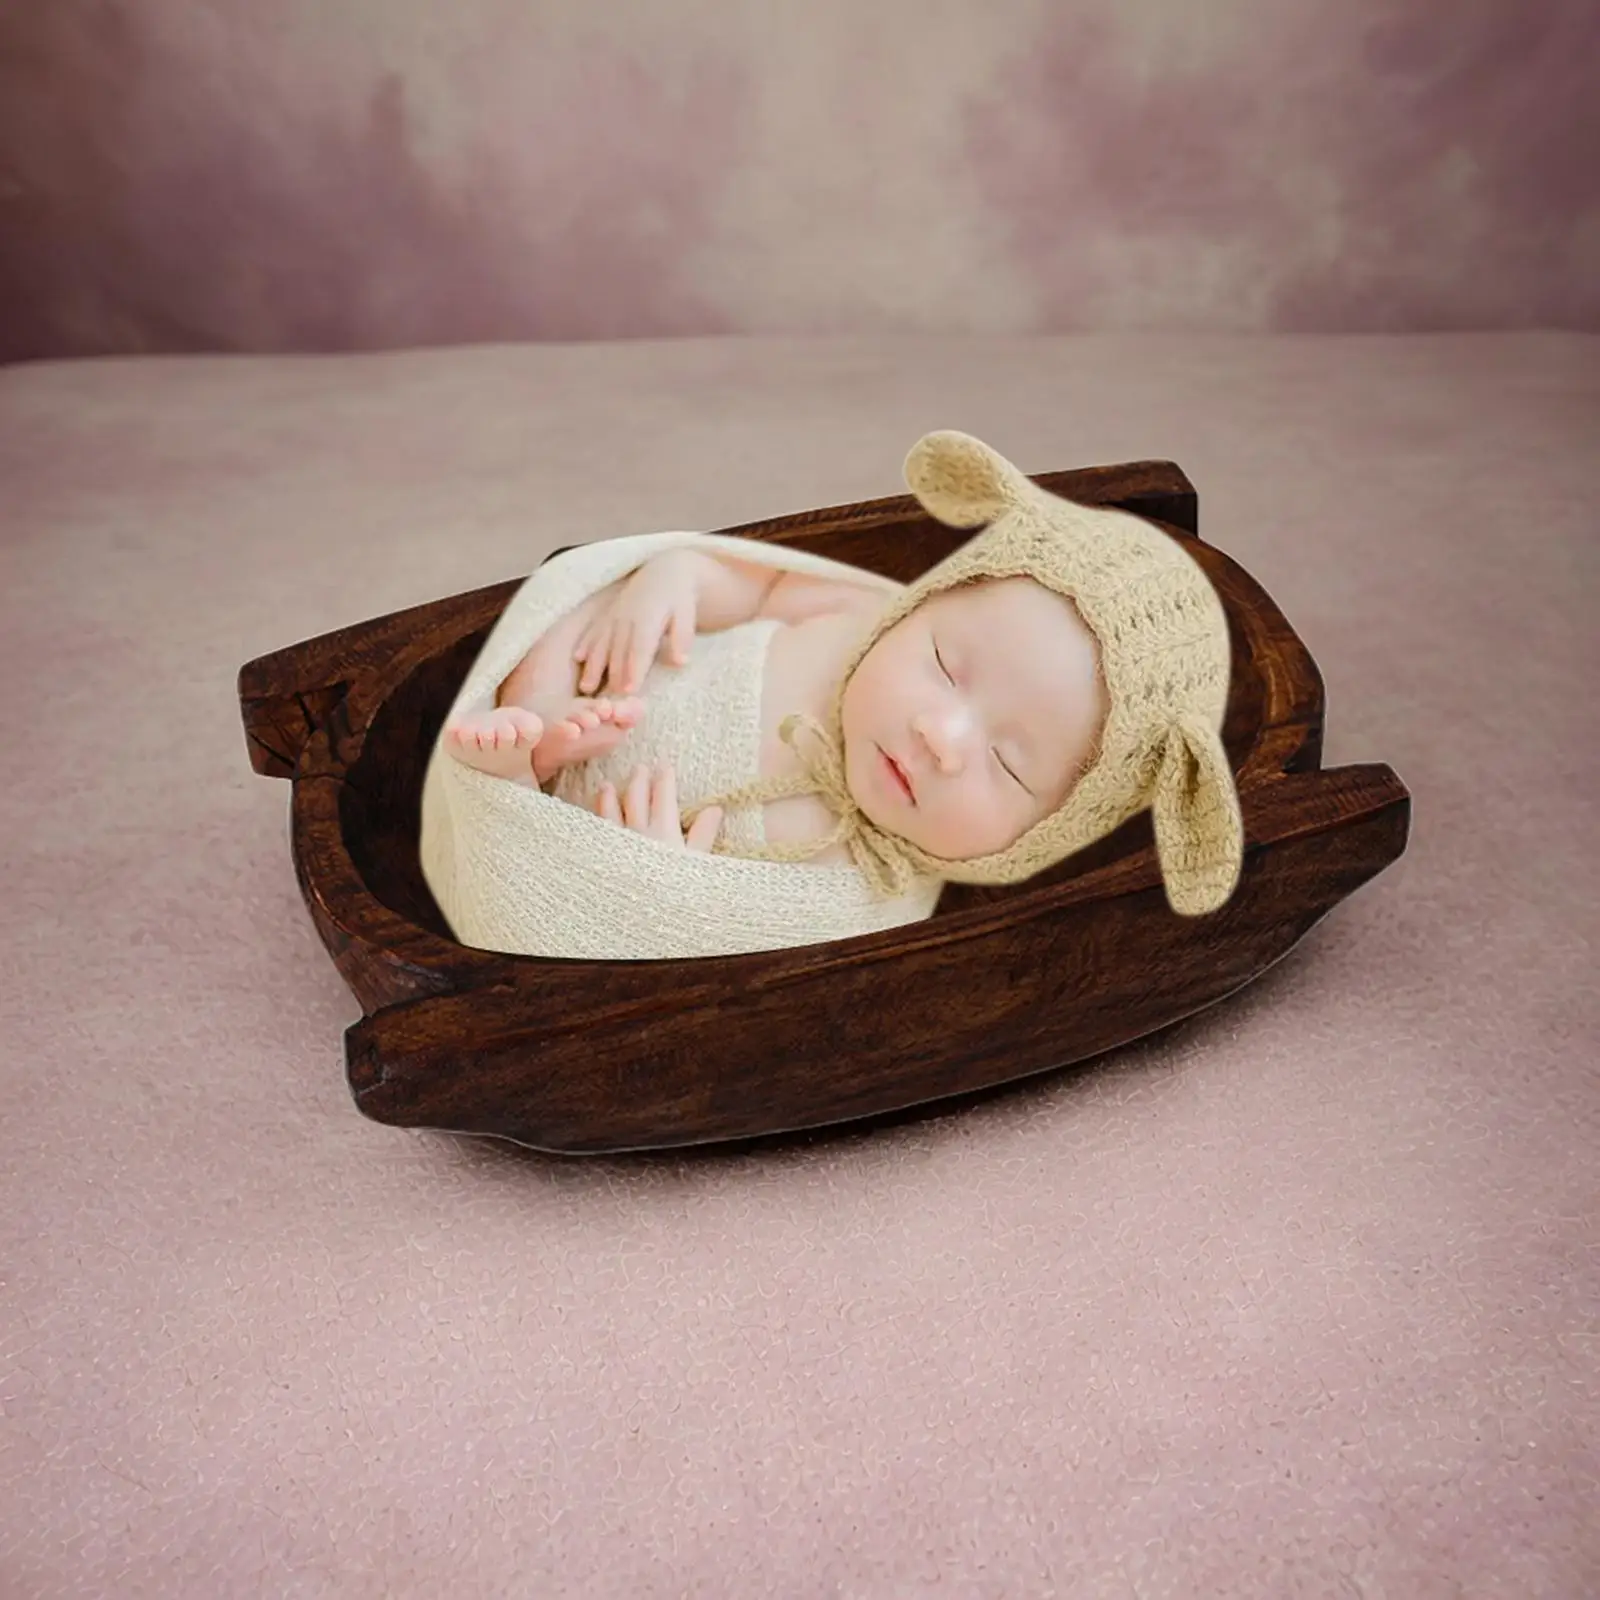 Infant Photography Props Decoration Wooden Basin Accessory Retro Seat Bed for Monthly Baby Baby Girls Boys Birthday Decor Party